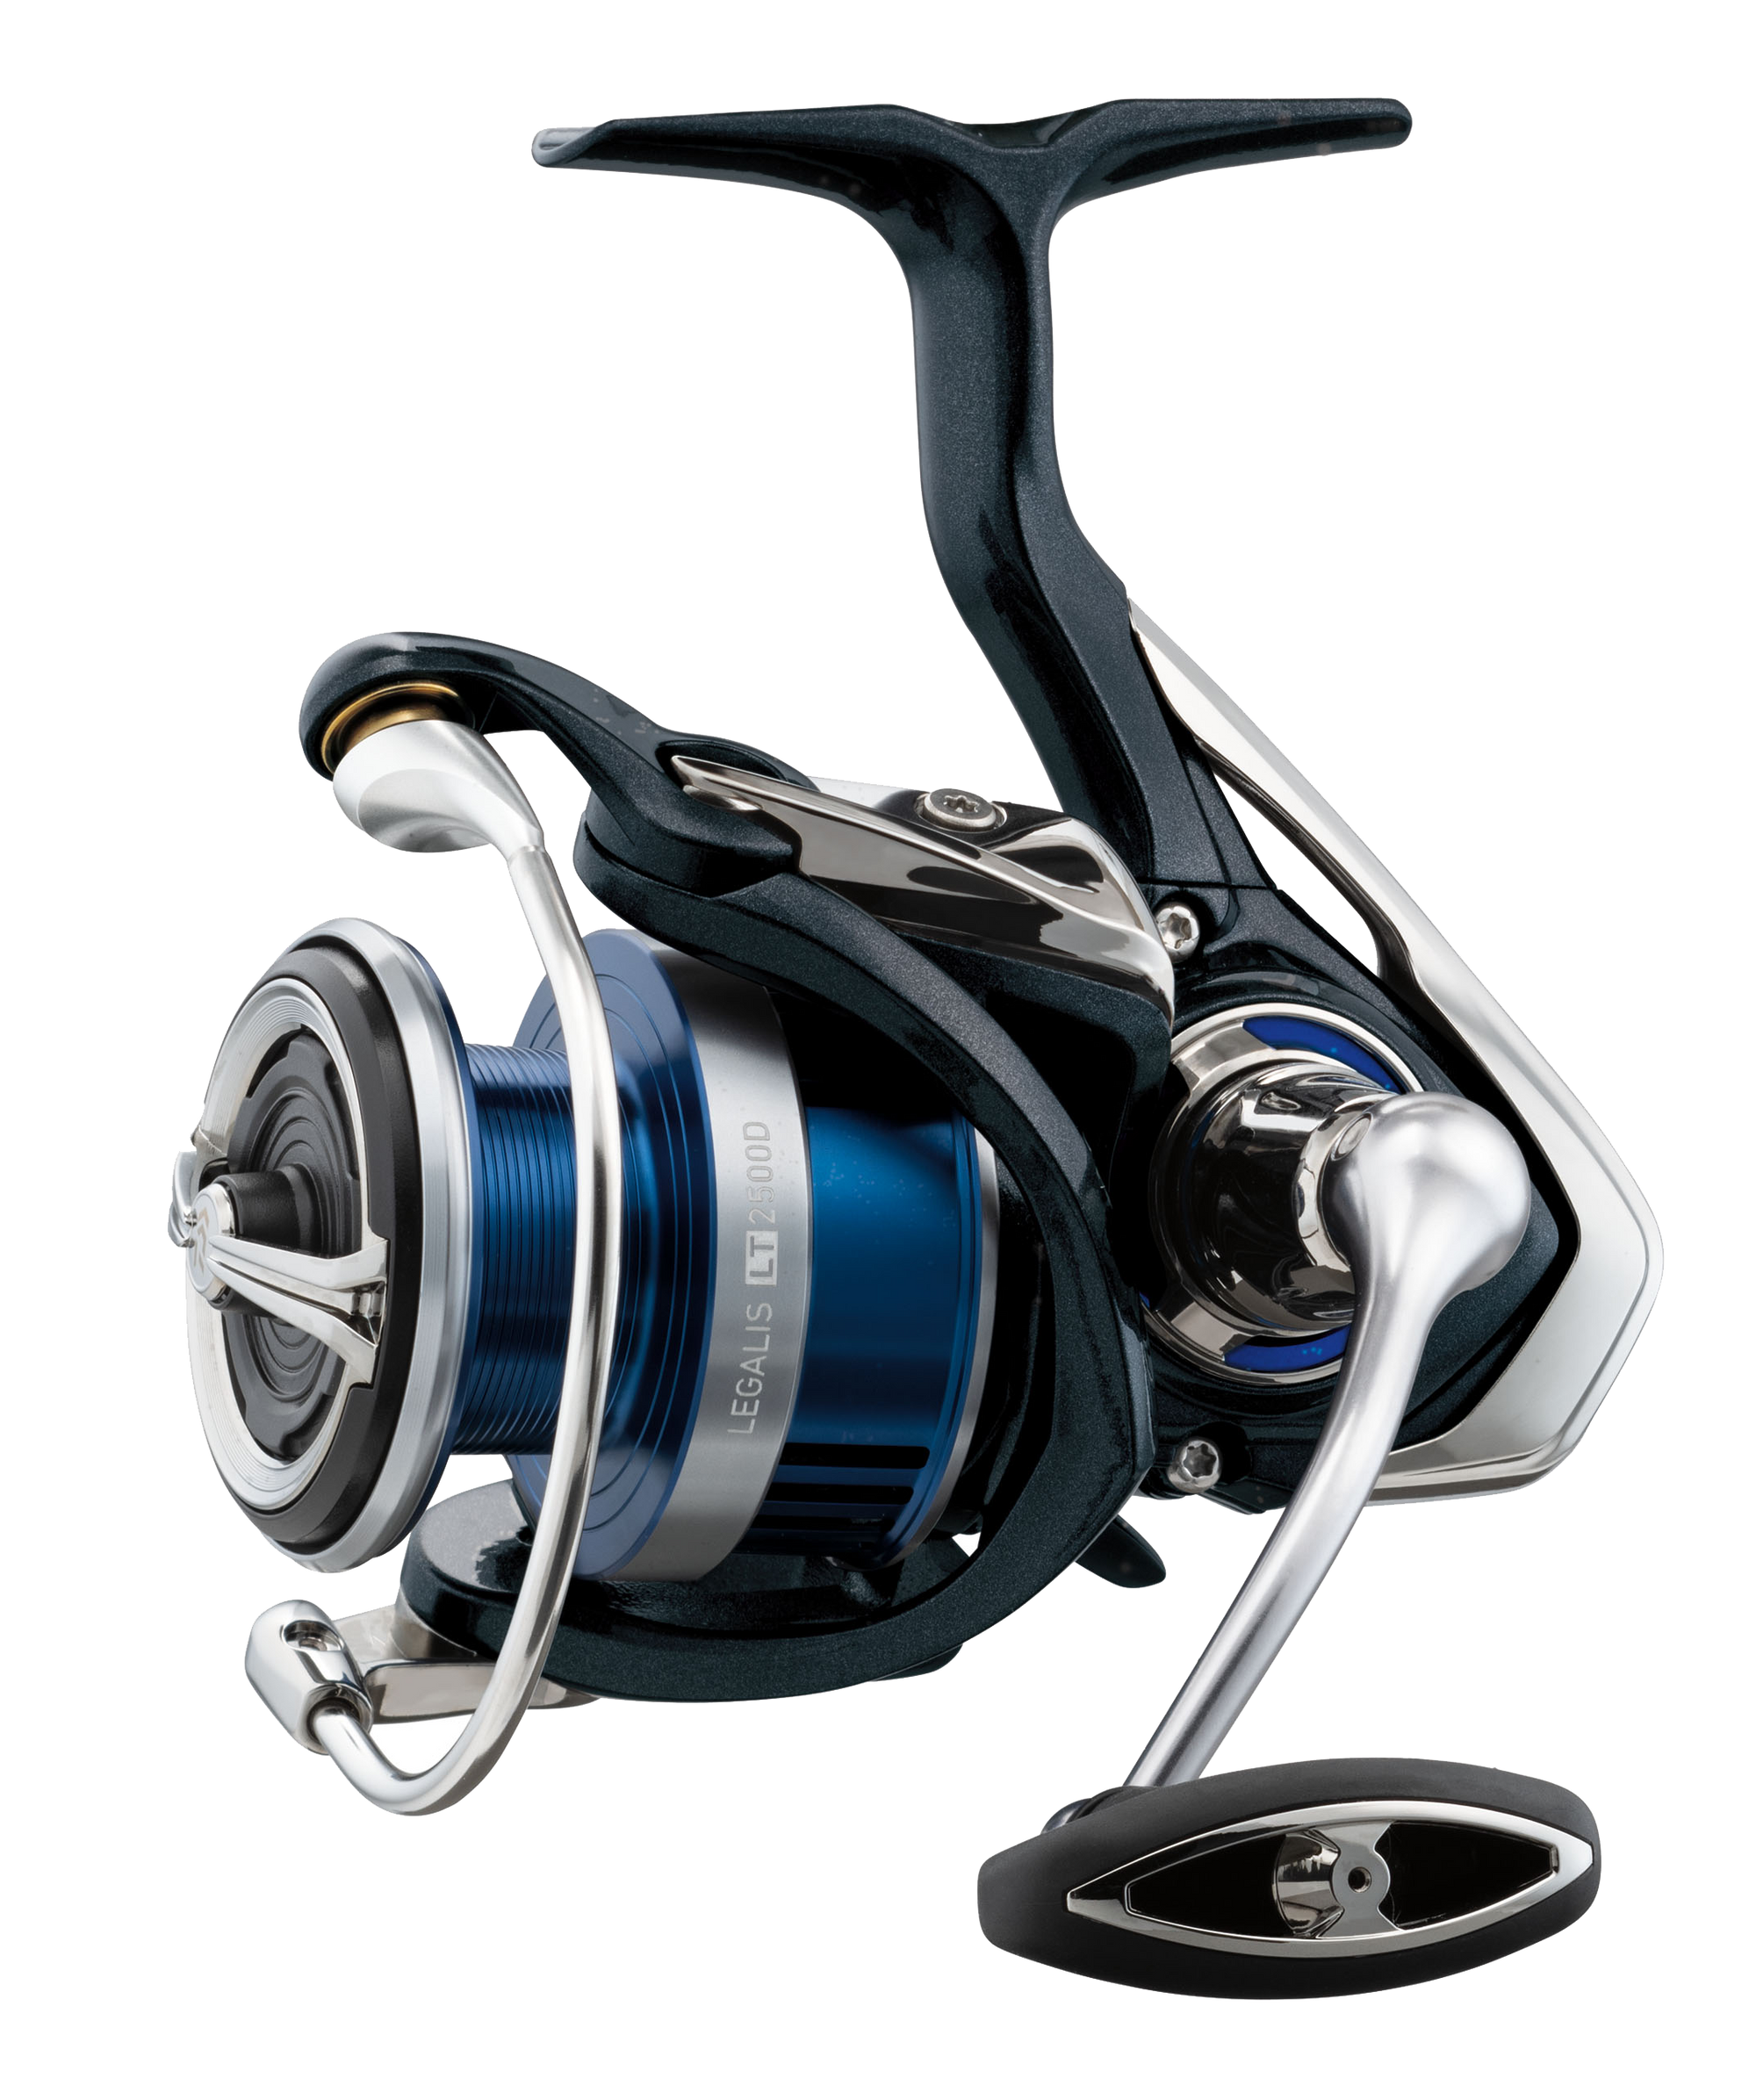 New Freshwater and Inshore Reel from Diawa